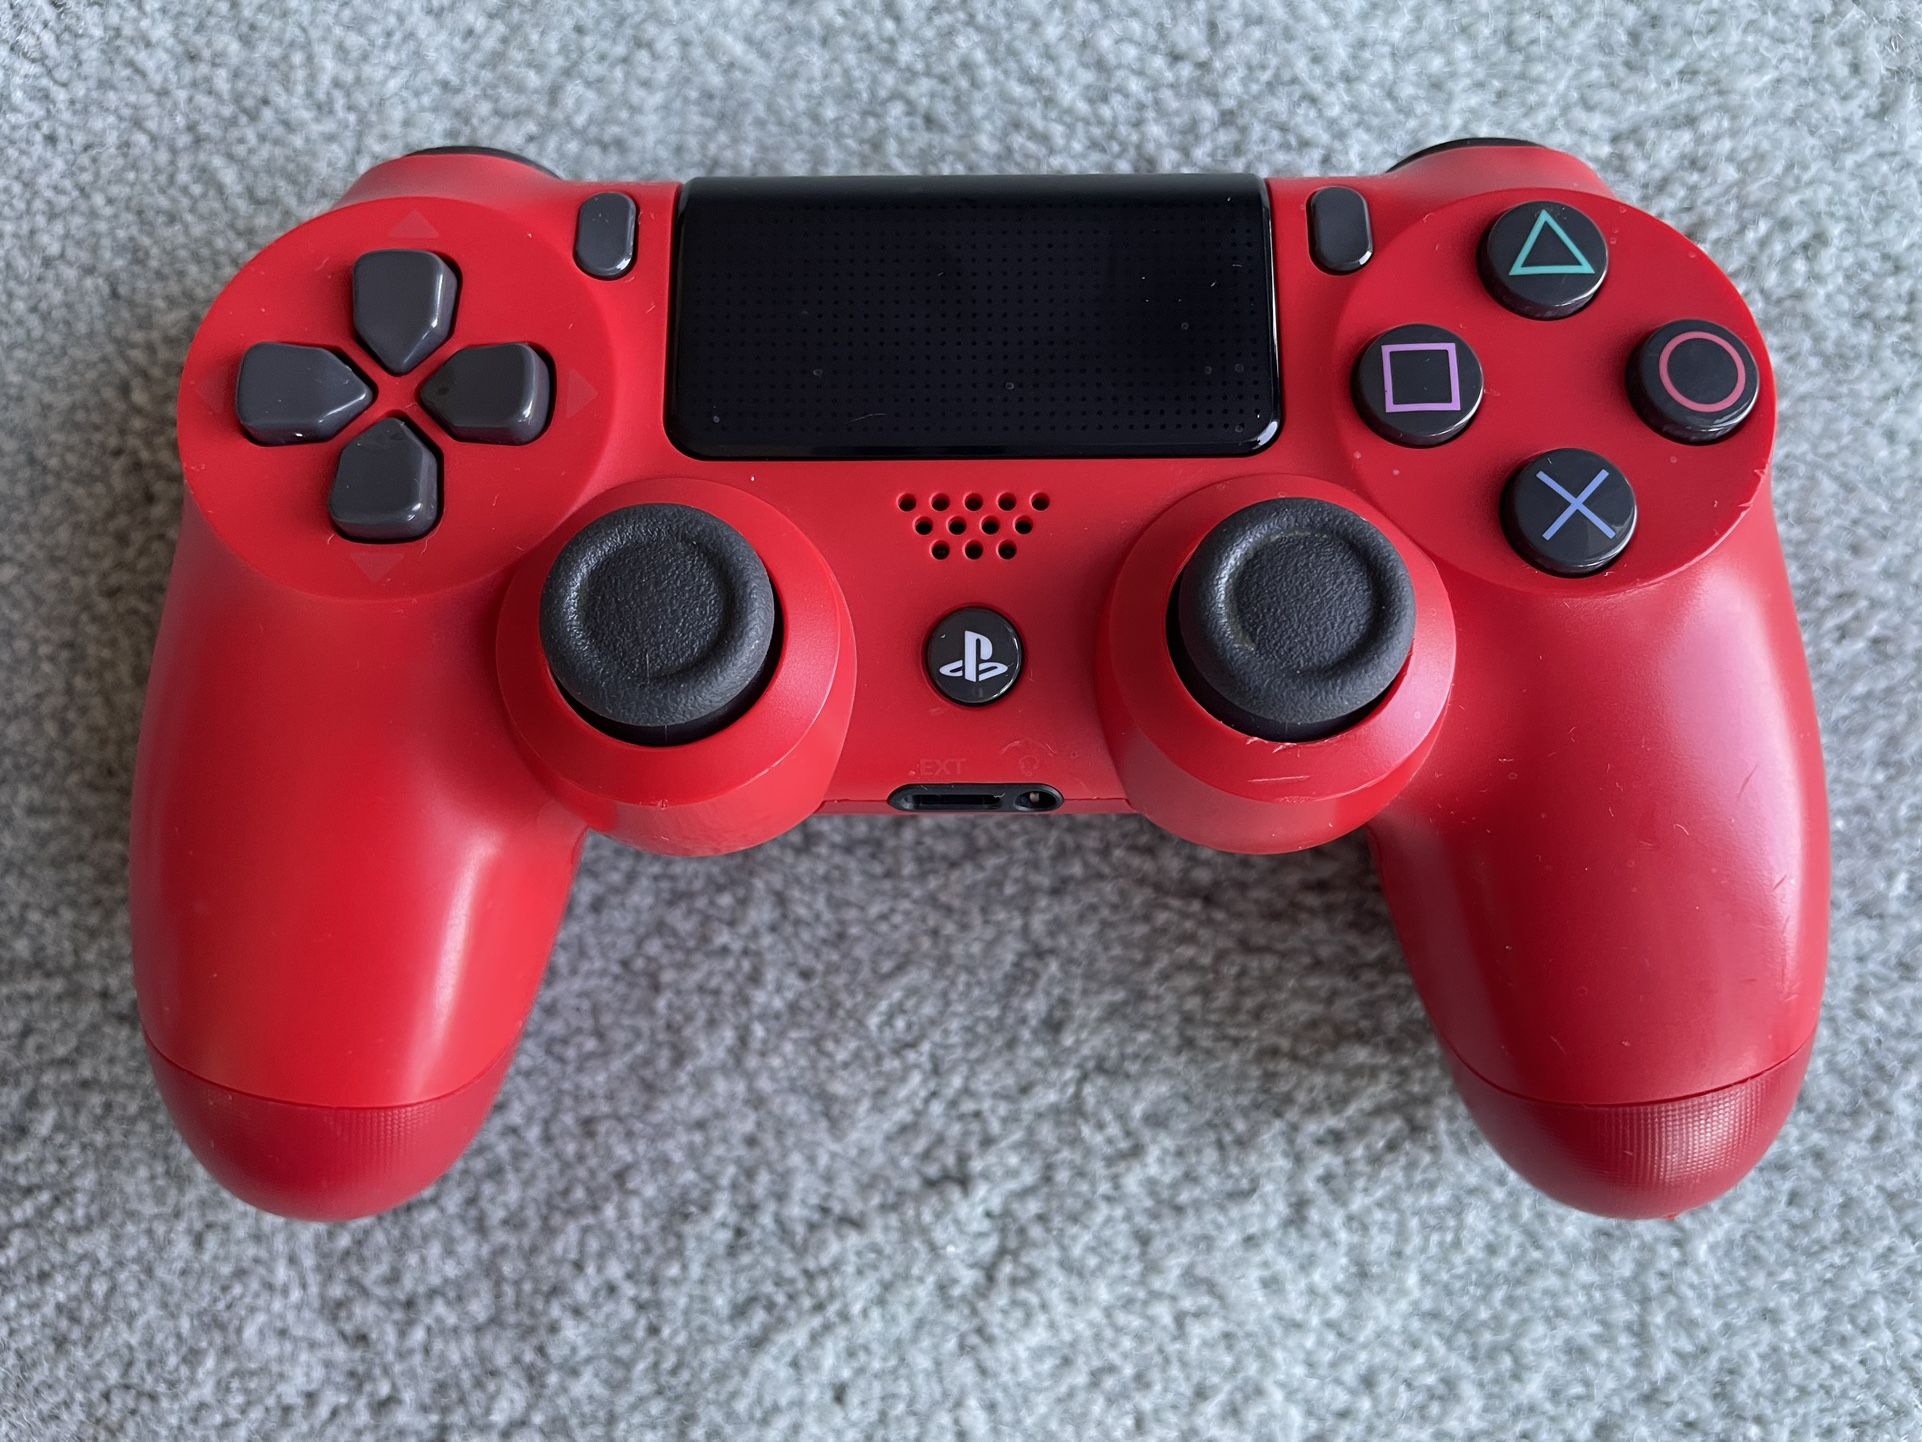 Magma Red DualShock 4 controller (PS4)